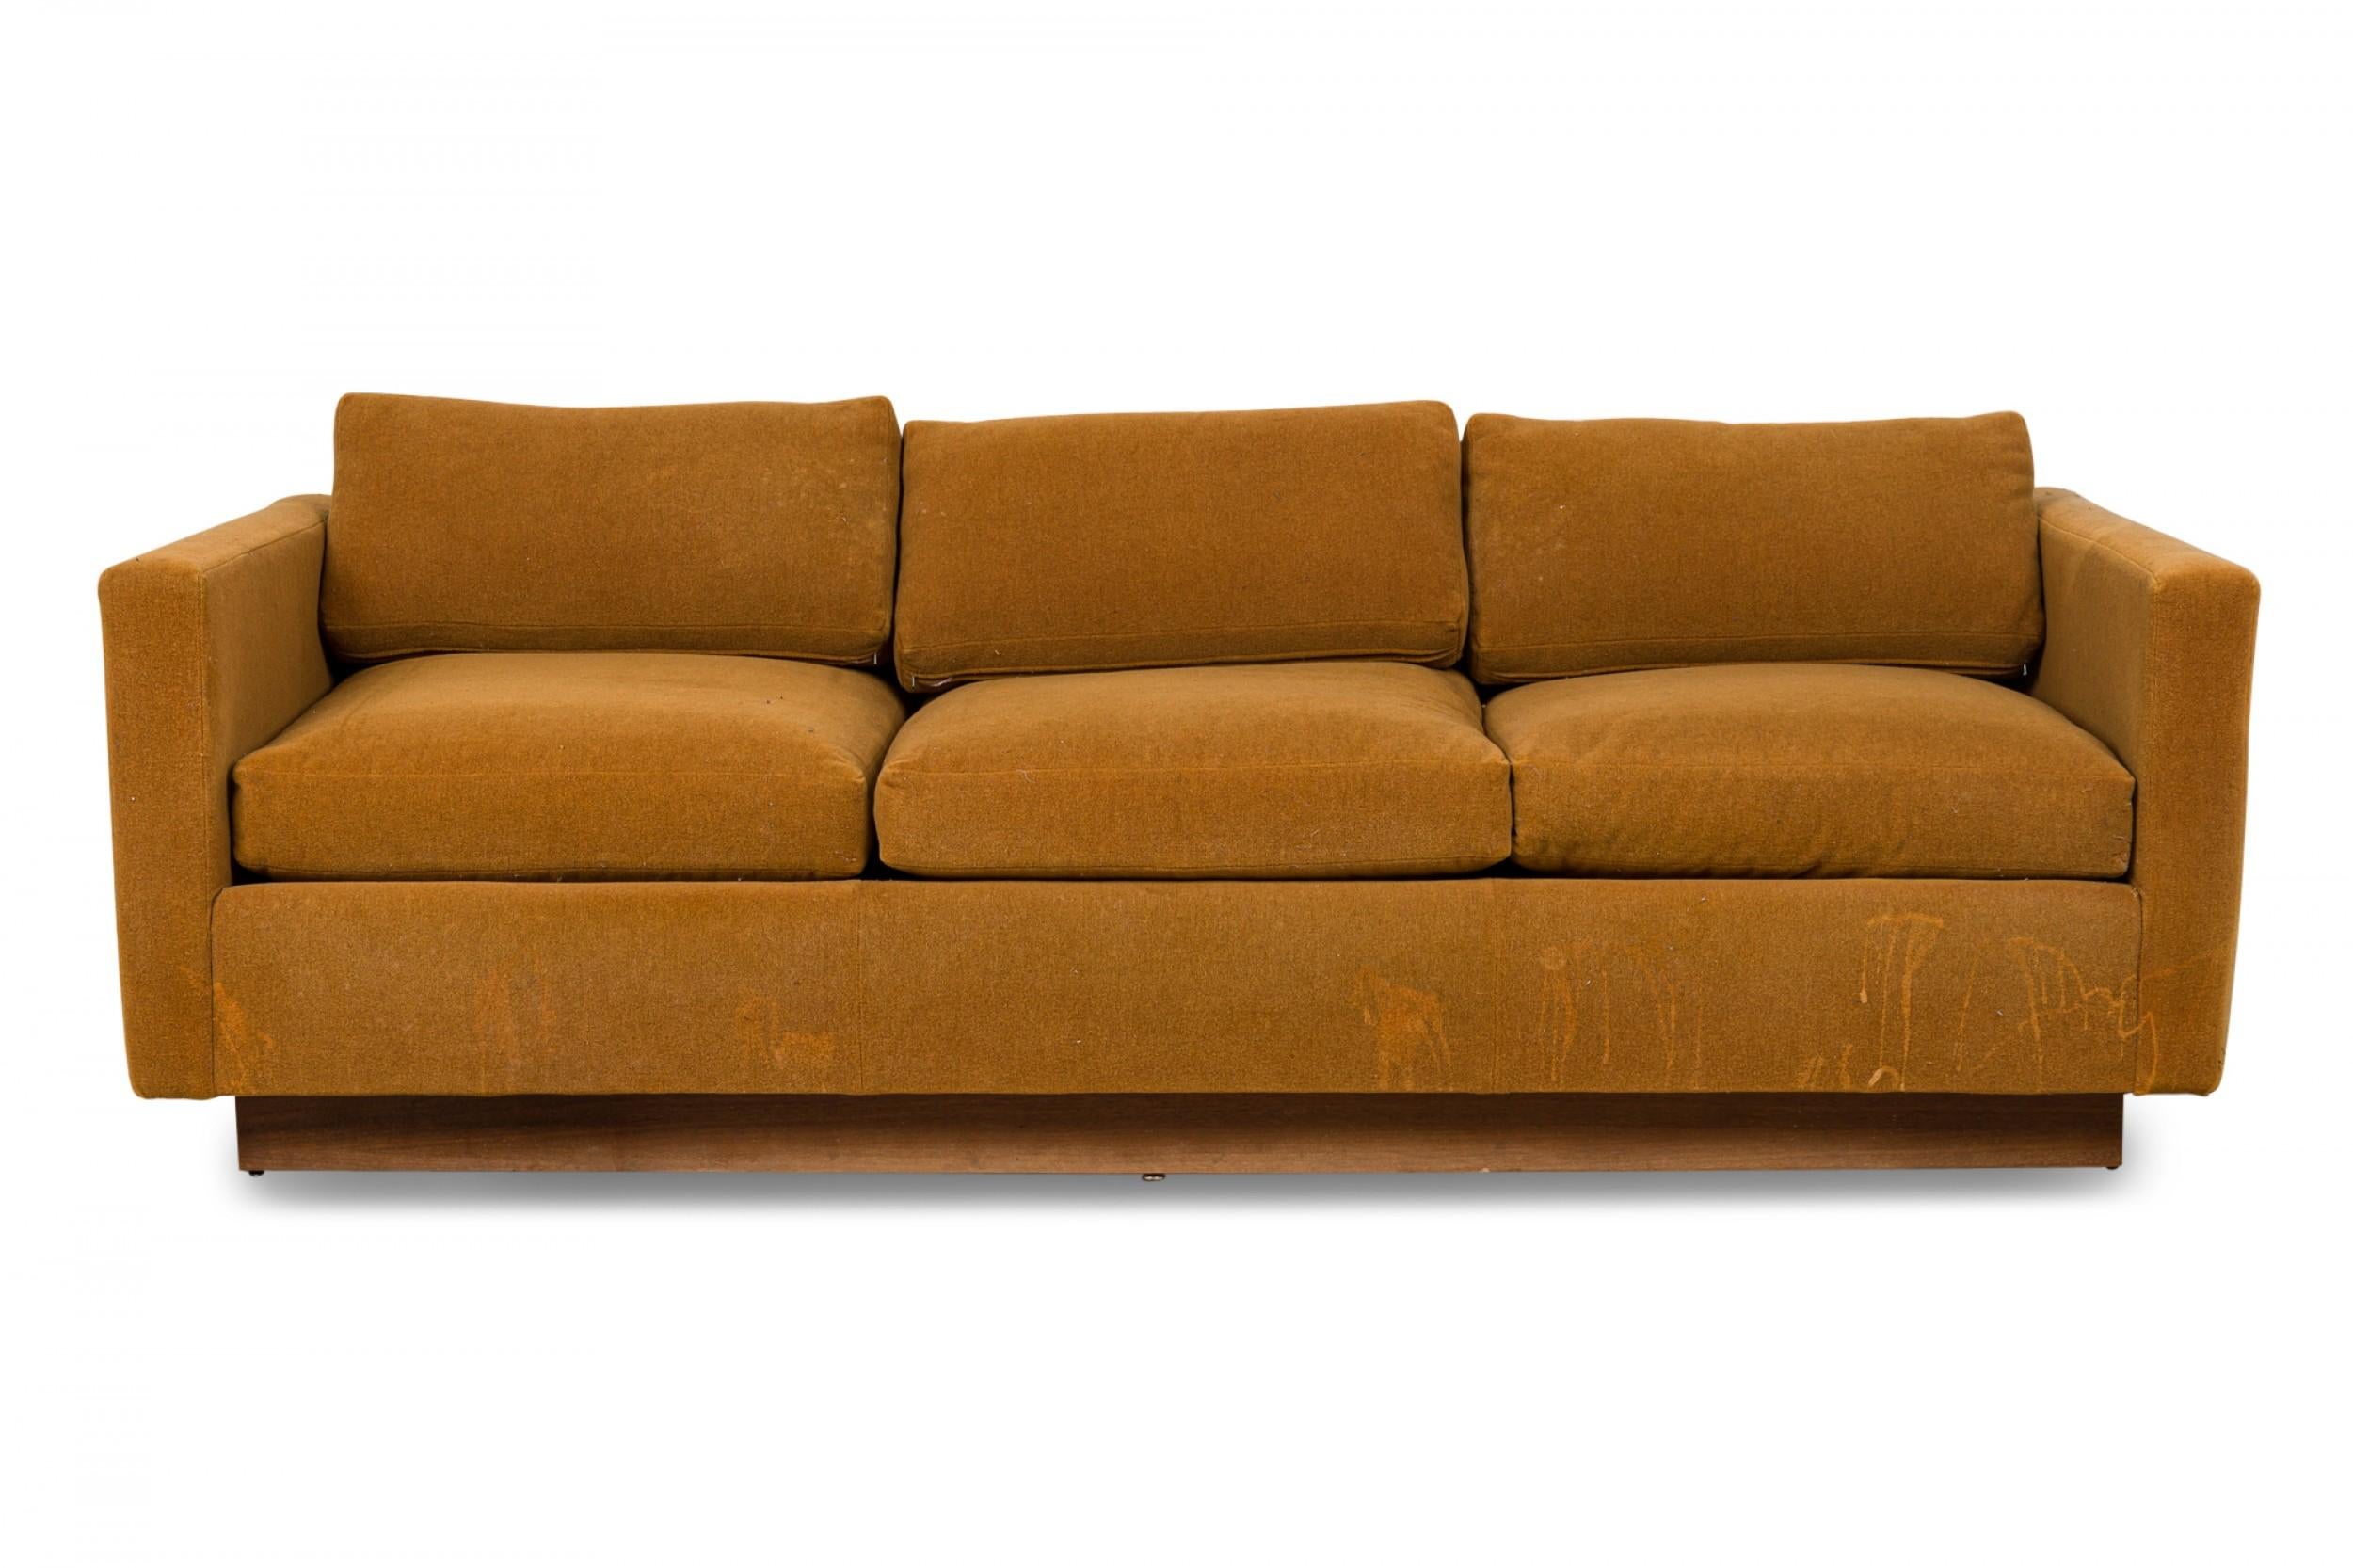 American Mid-Century 'Tuxedo' form sofa in gold colored fabric upholstery resting on a wooden platform base. (MILO BAUGHMAN)
